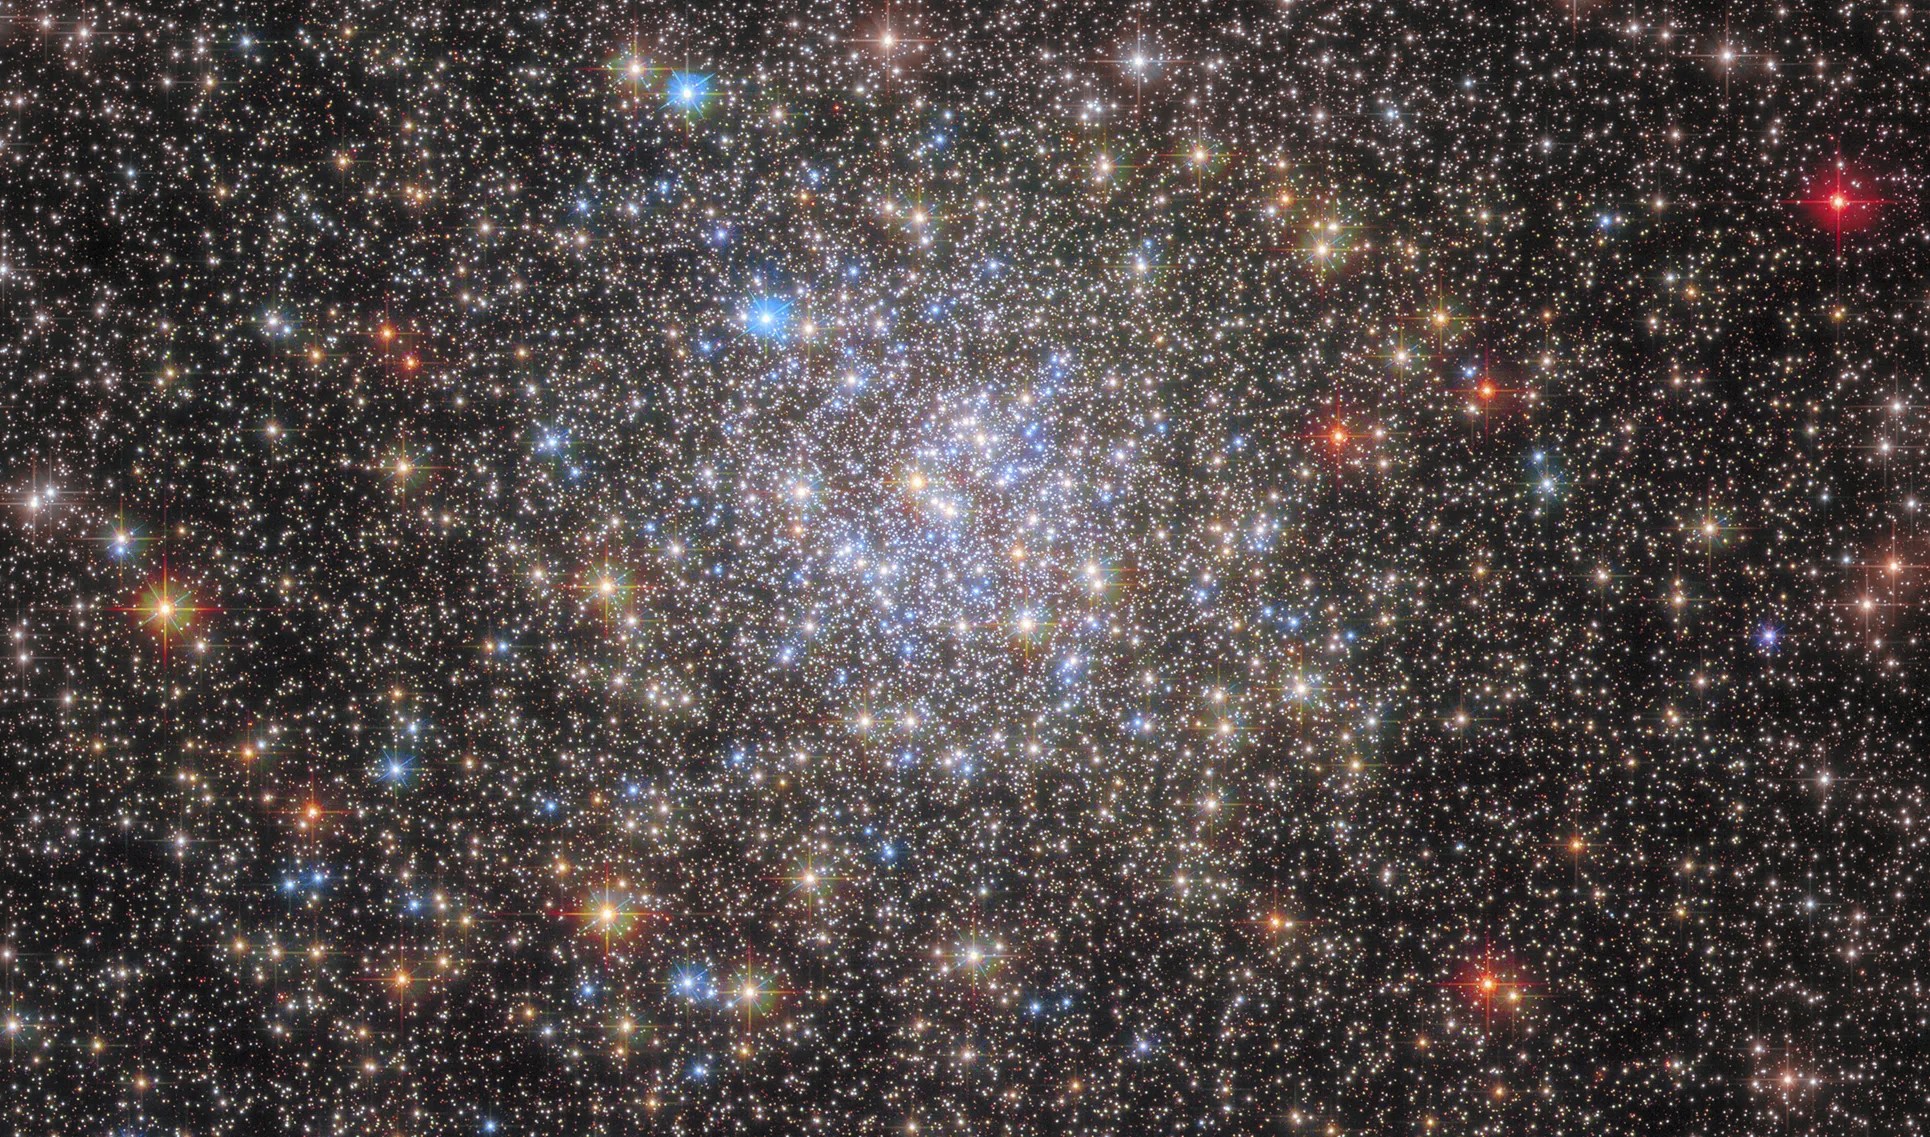 Snapshot: Blue stars steal the show in NGC 2031